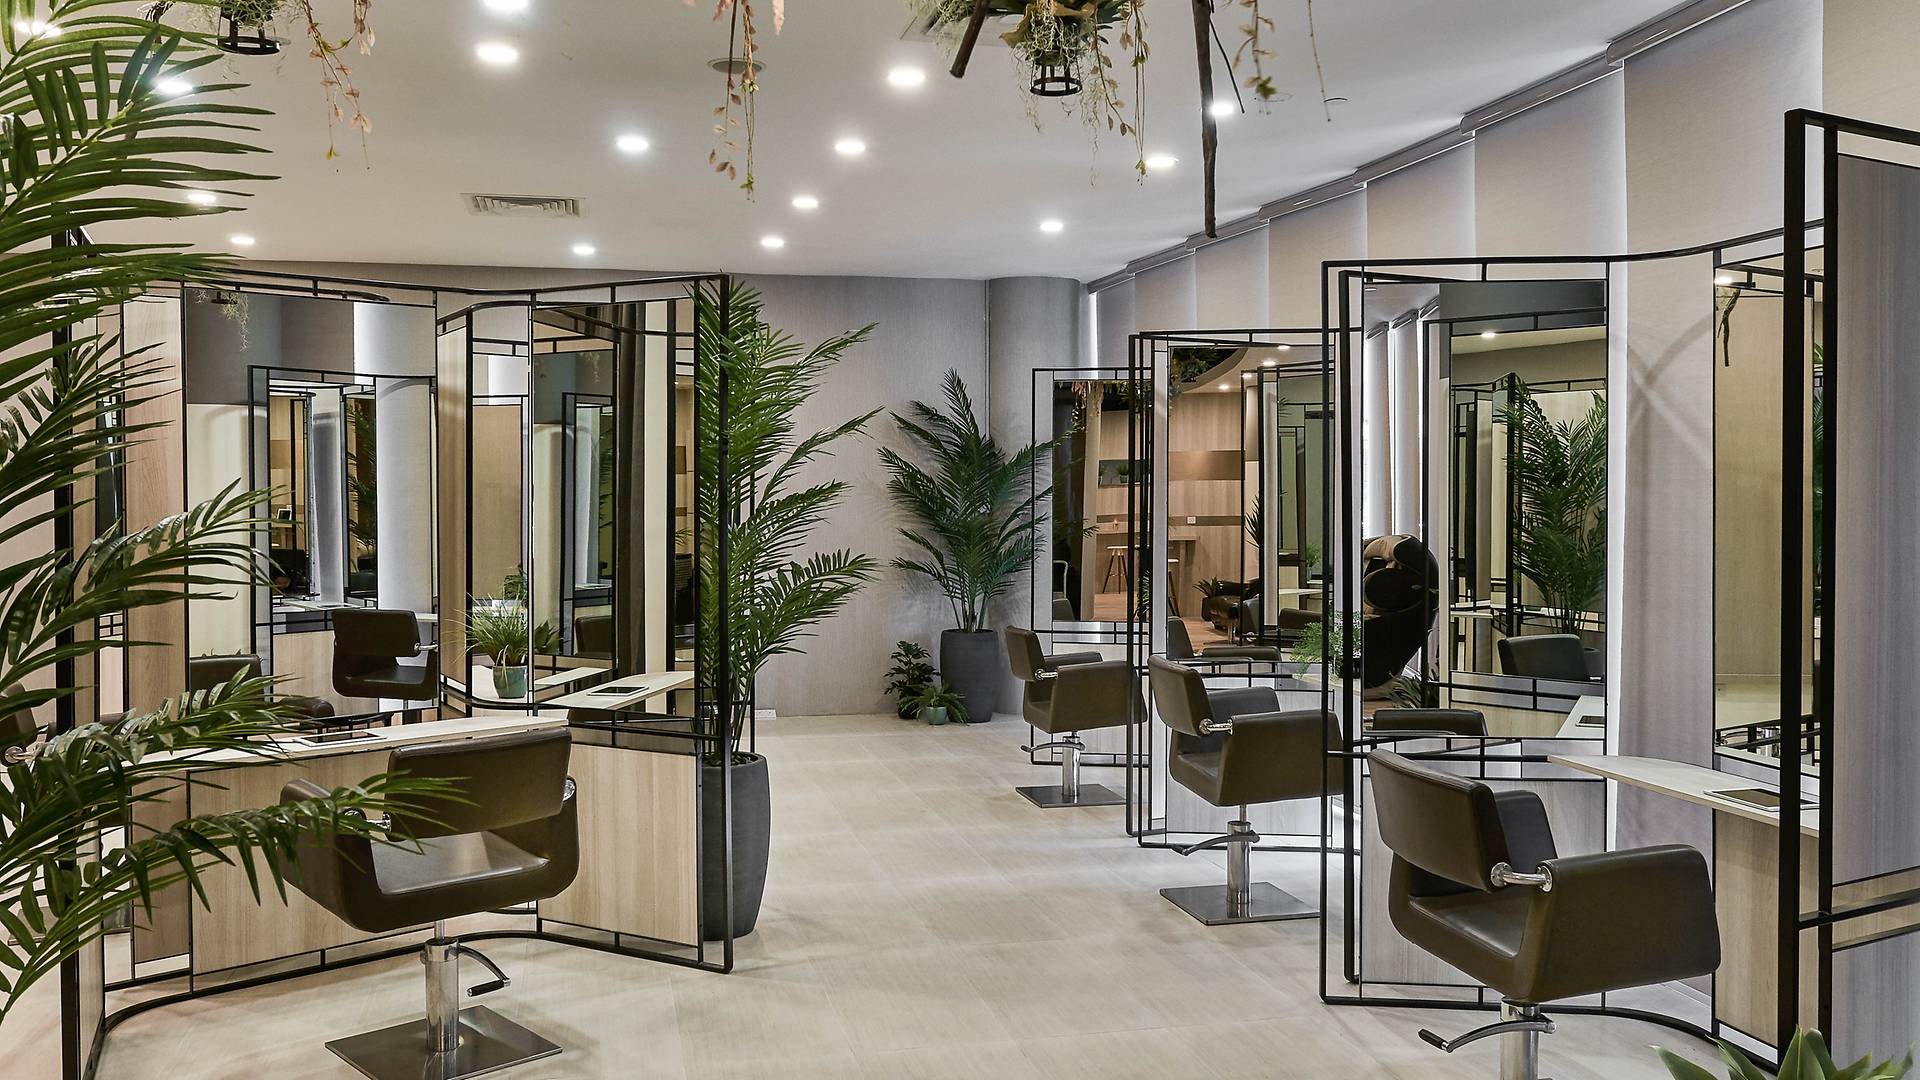 Kimage Hair Studio Singapore Review, Outlets & Price ...